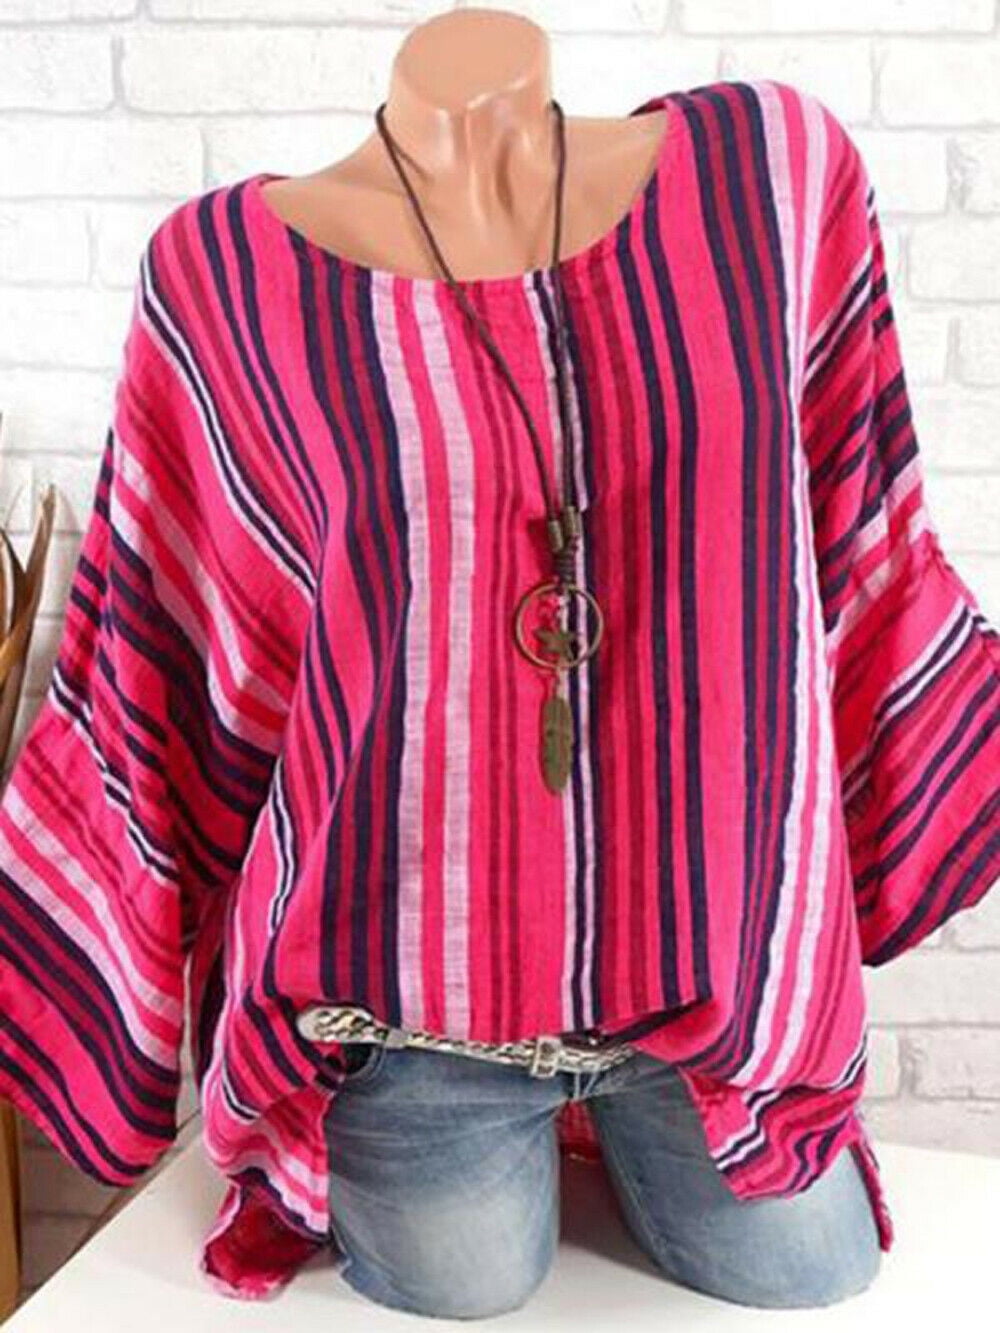 NANTE Top Loose Womens Blouse V Neck Stripe Long Shirt Long Sleeve Tops Ladies Clothes Womens Clothing Costume Habiliment 